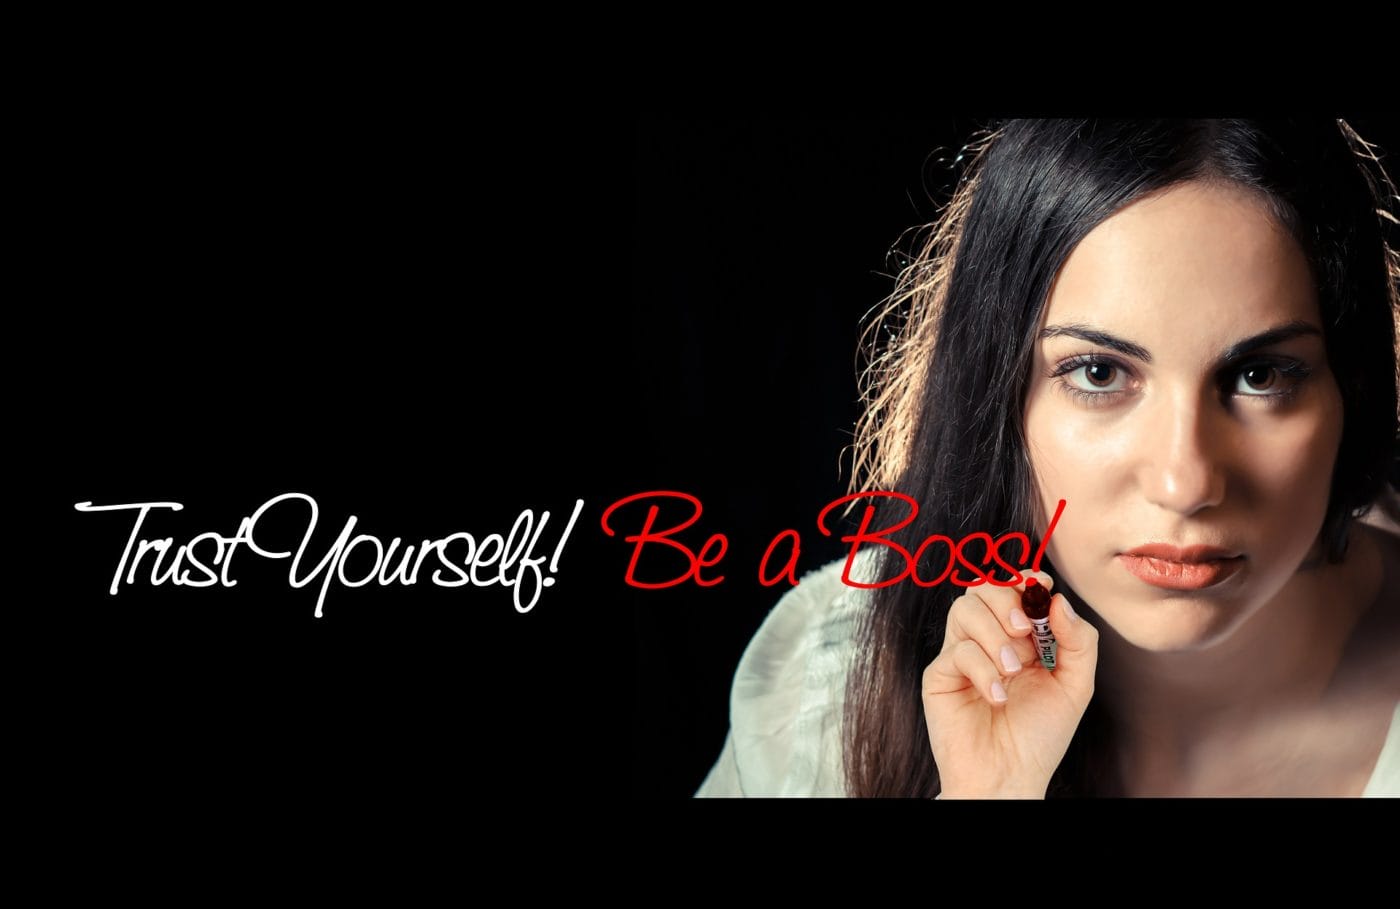 Woman looking at the screen saying "trust yourself be a boss"